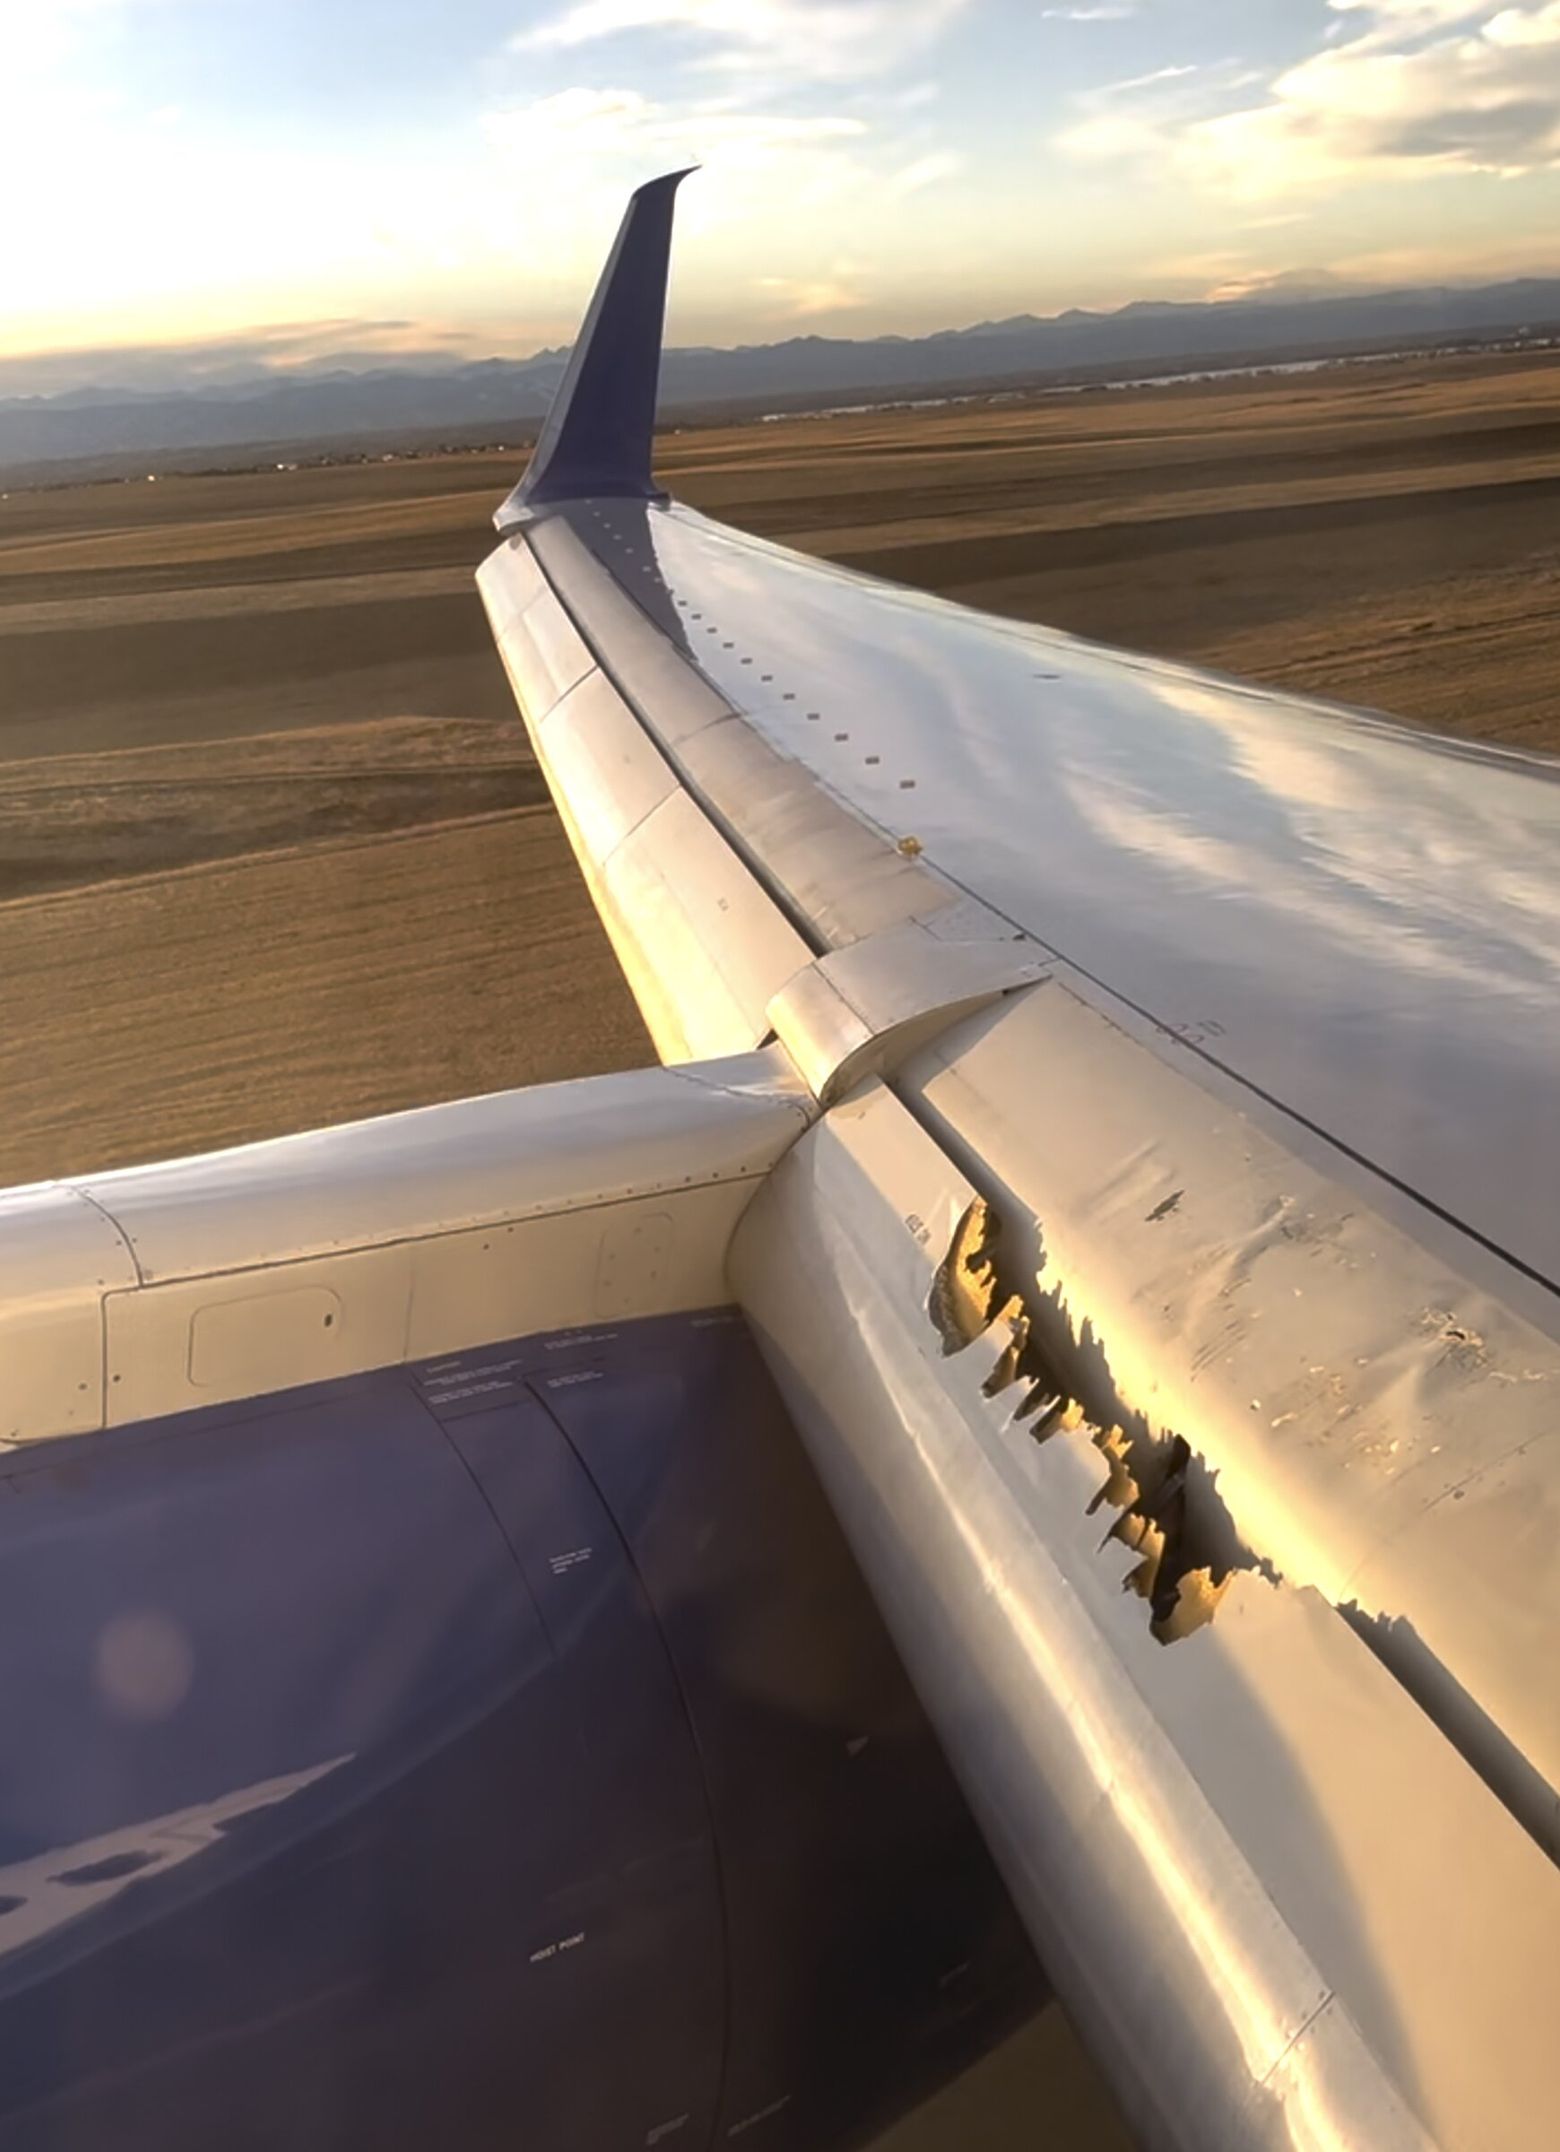 United flight from San Francisco to Boston diverted due to damage to one of  its wings